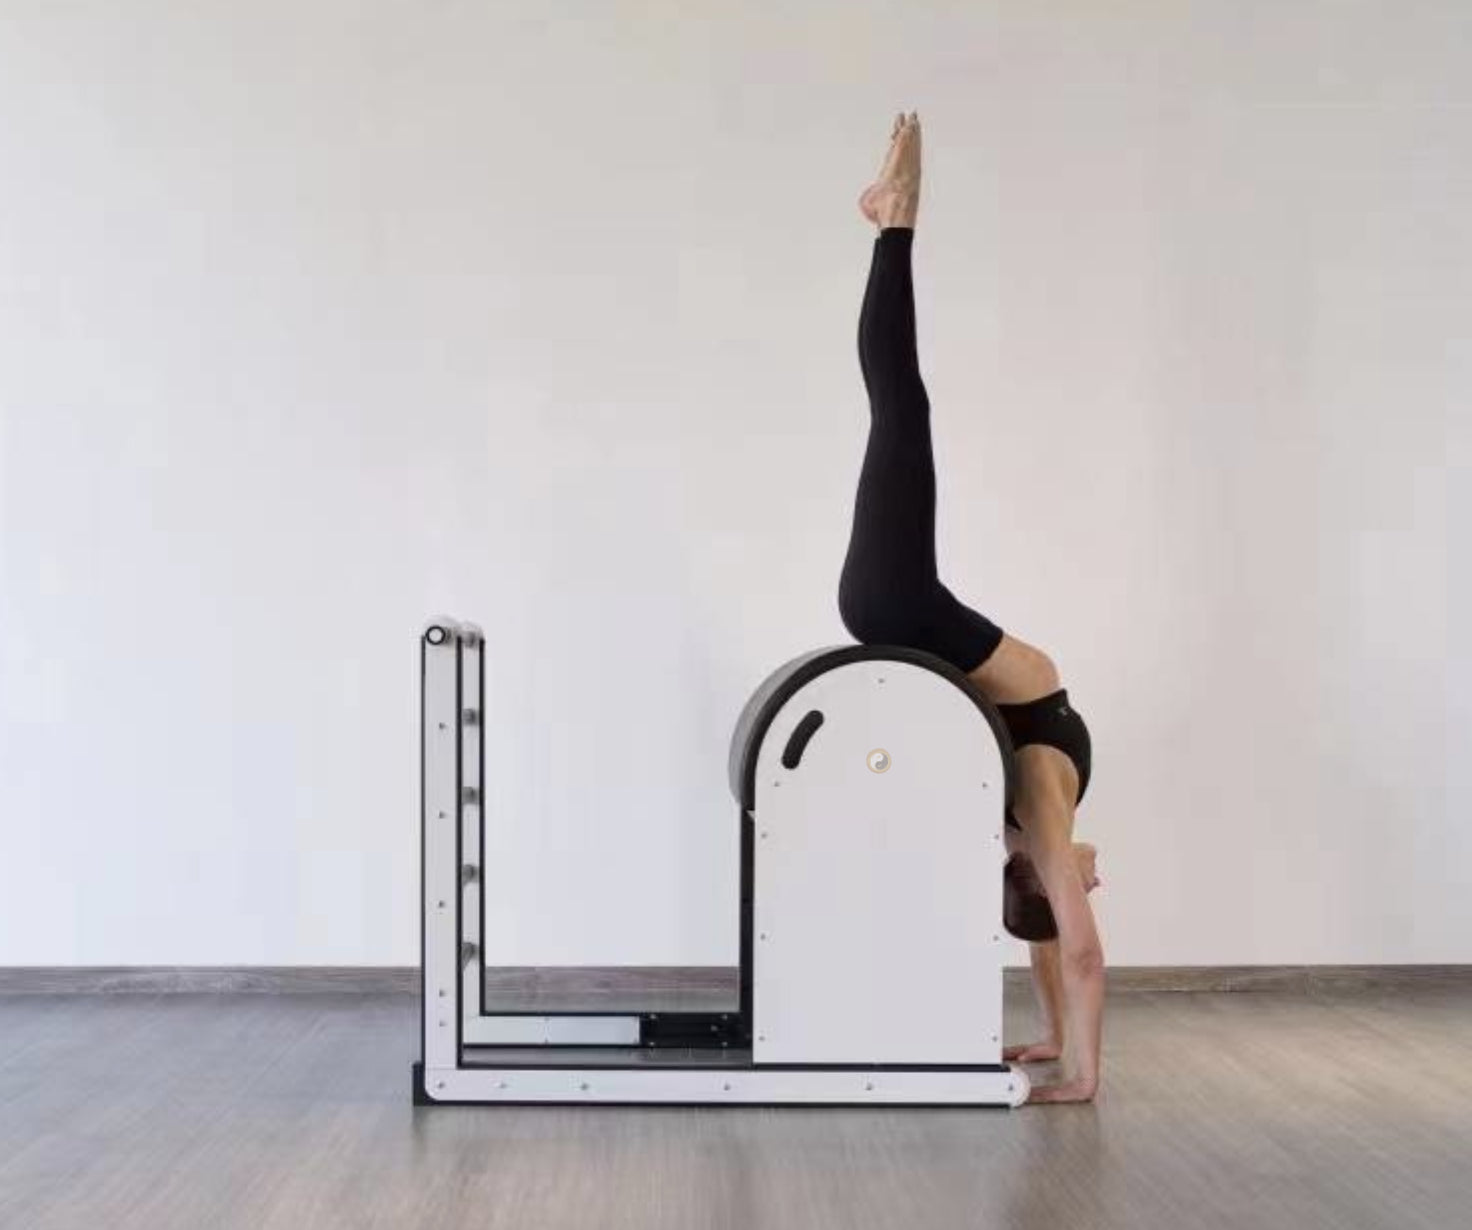 Pilates Ladder Barrel - Pilates Arc - Black and White Modern Design - Pilates  Ladder Barrel Yoga and Meditation Supplies in the US - Personal Hour –  Personal Hour